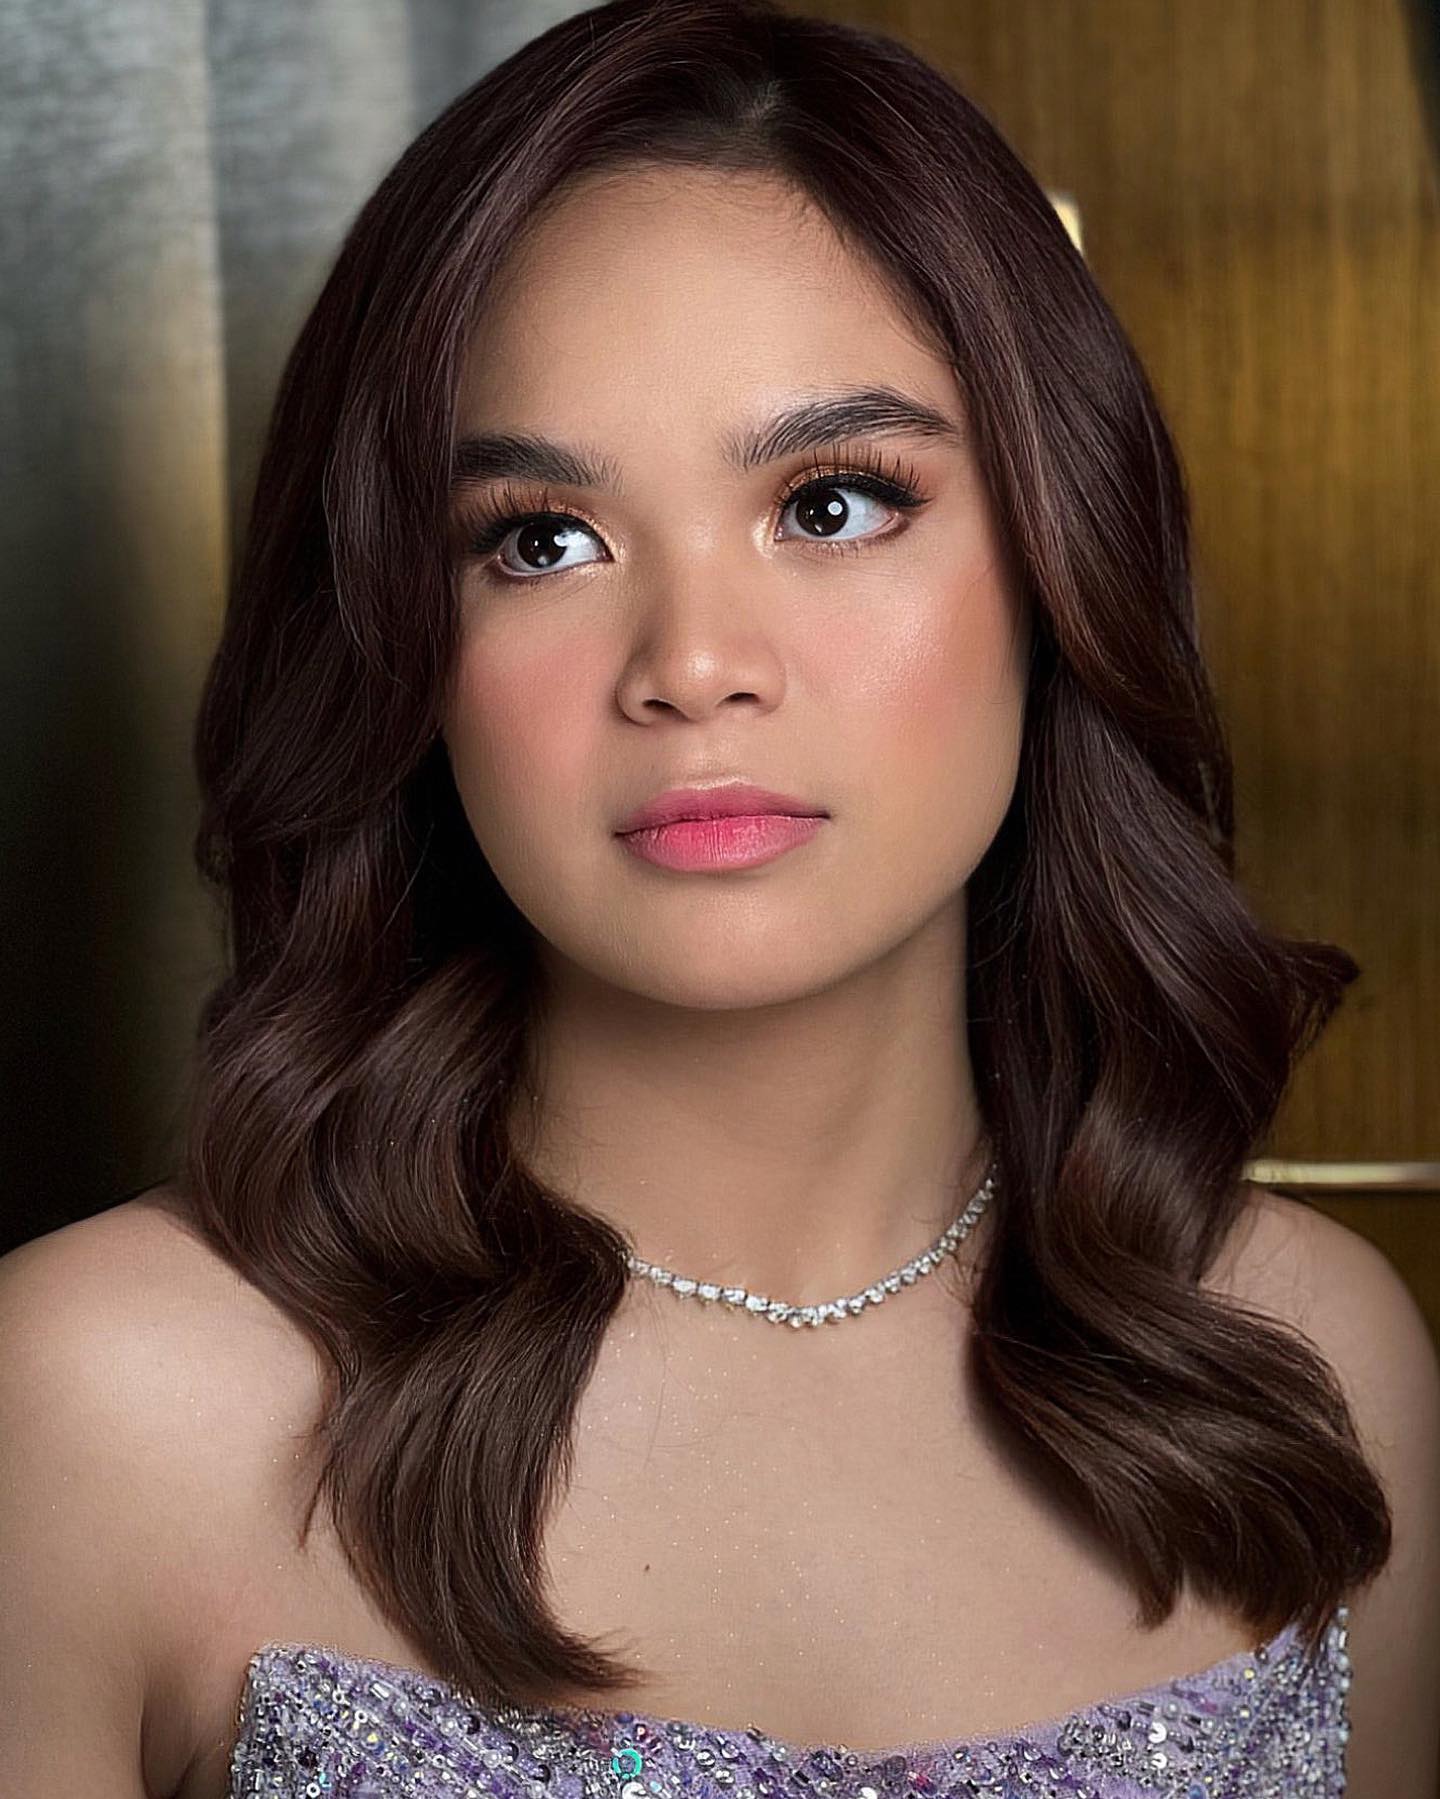 Manny Pacquiao's eldest daughter Princess attends prom in